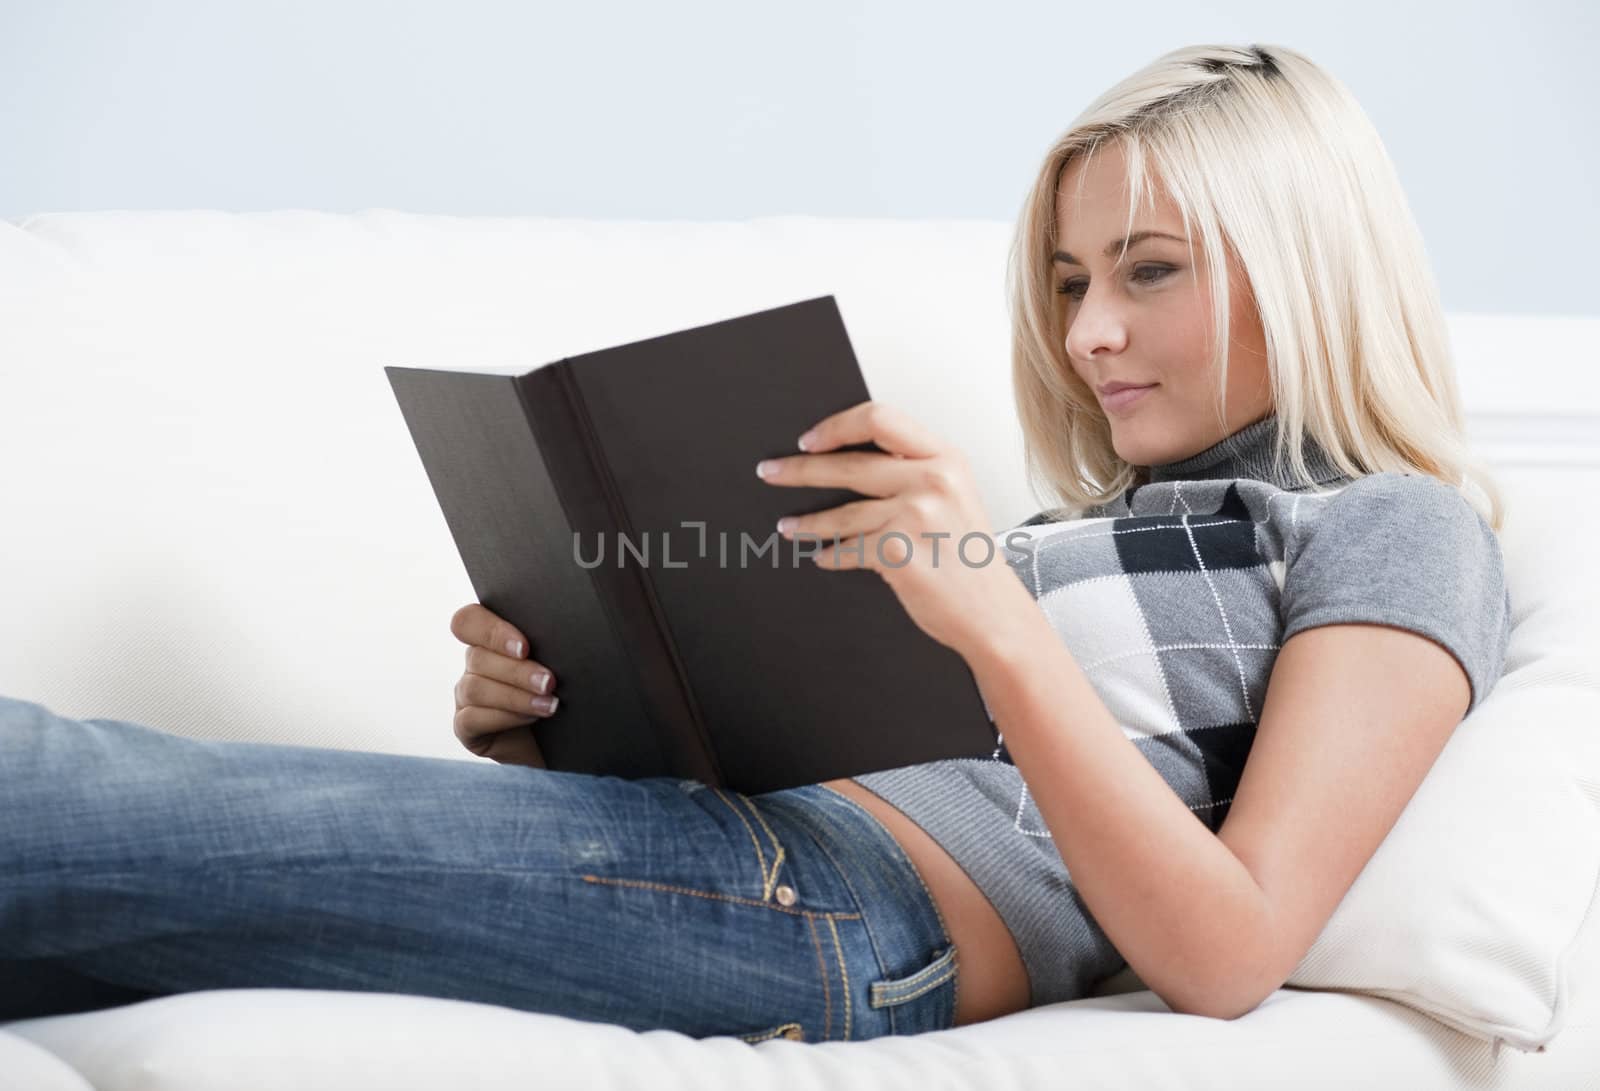 Cropped view of smiling woman relaxing on white couch with a book. Horizontal format.